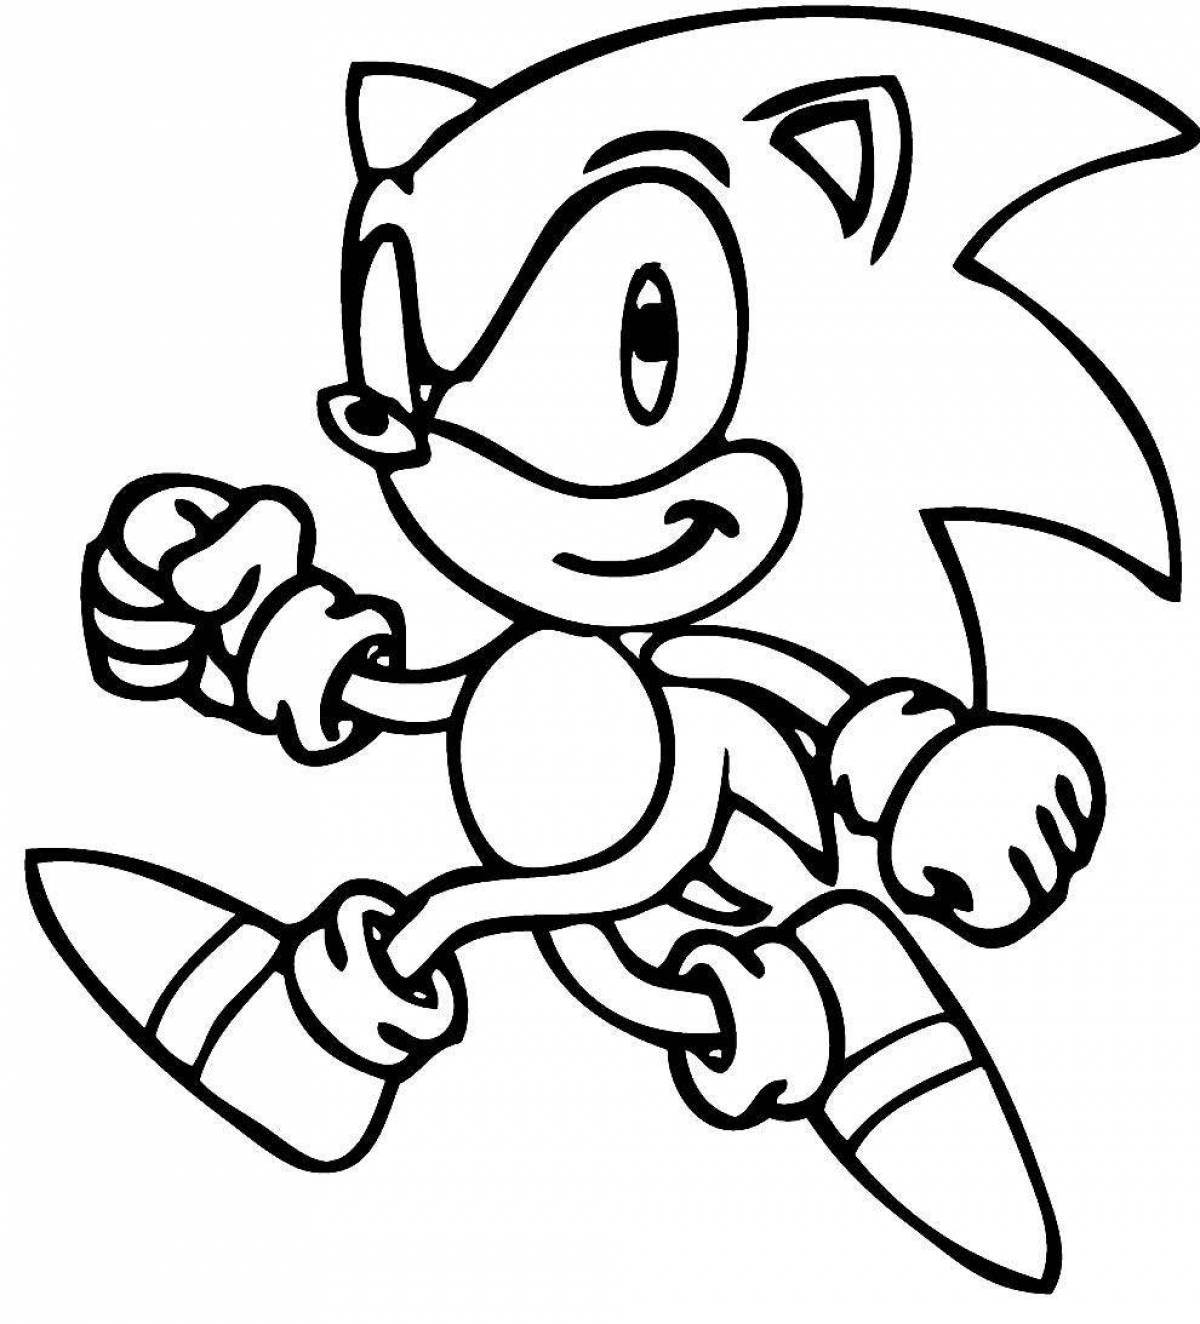 Golden sonic bright coloring